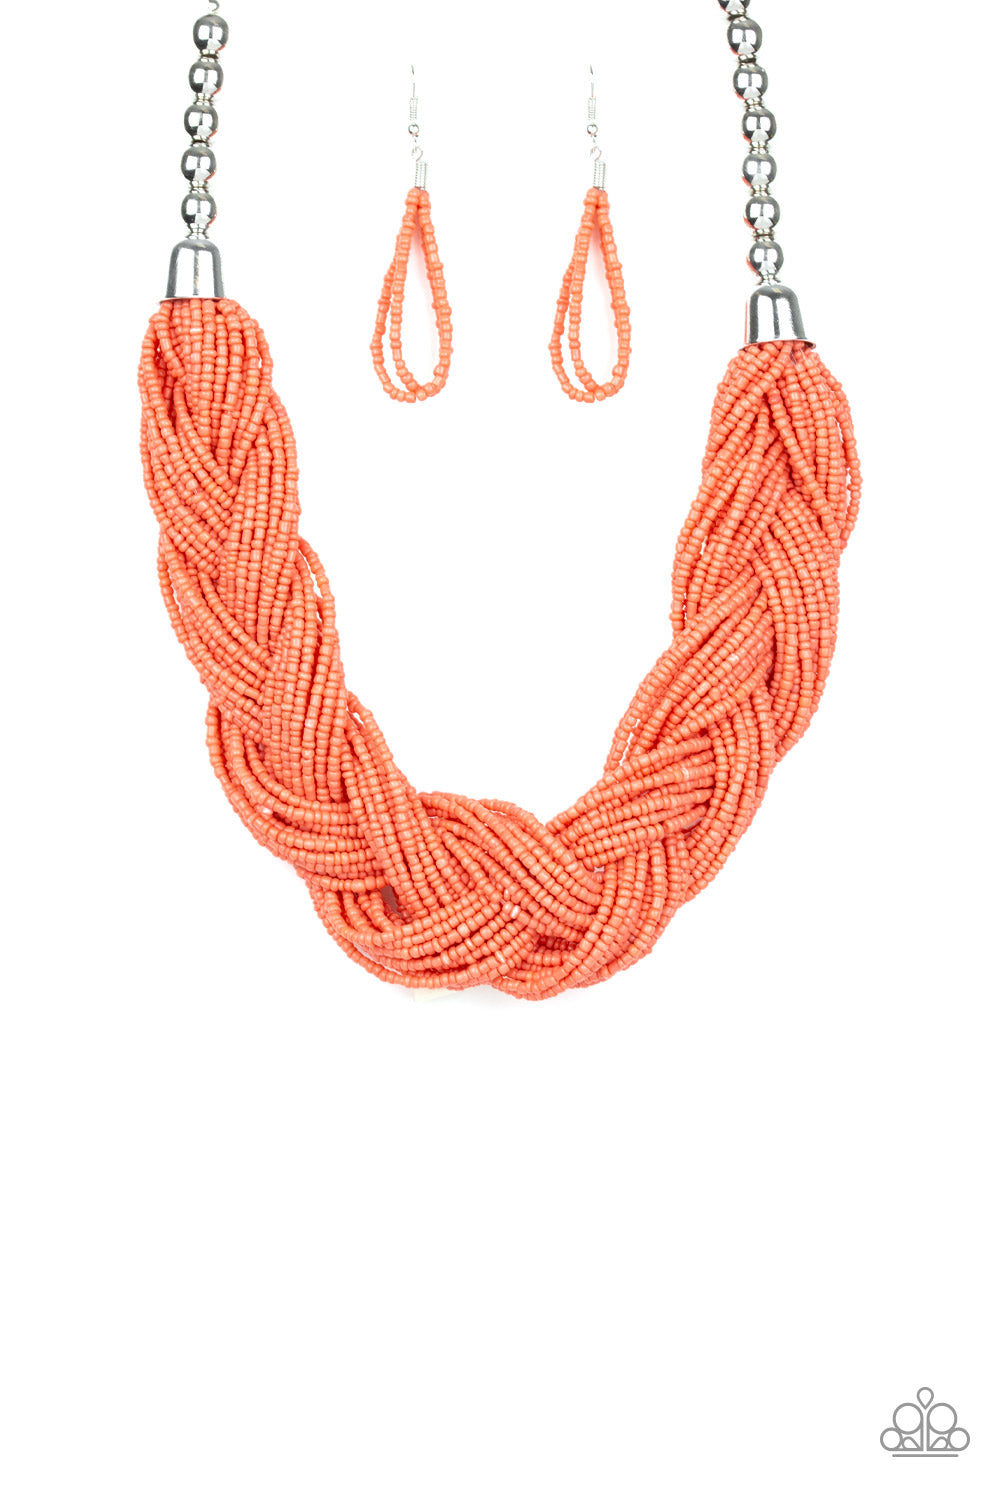 Paparazzi Accessories The Great Outback - Orange Seedbead Necklaces - Lady T Accessories